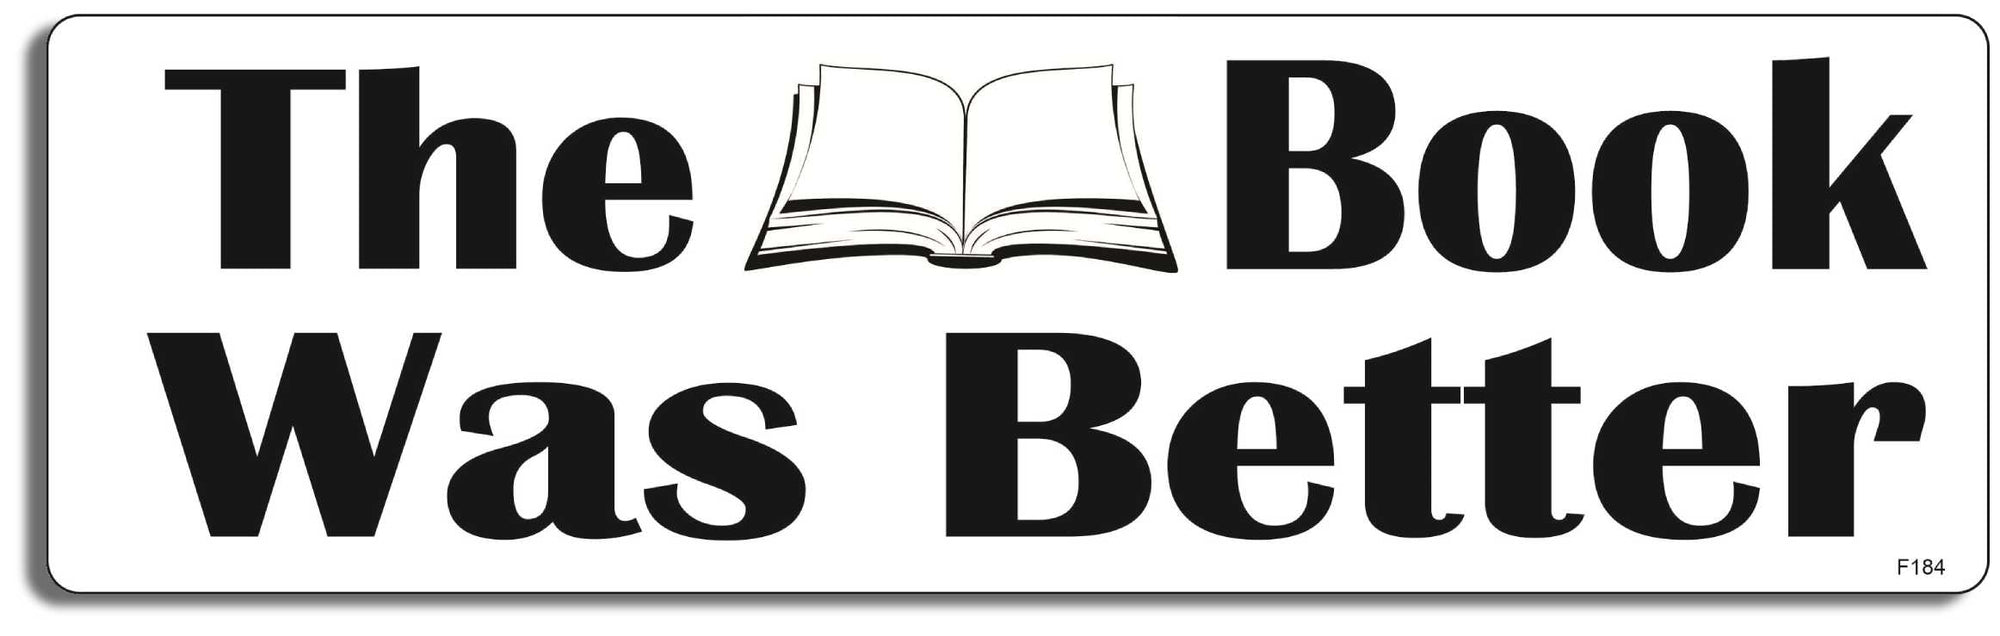 The Book Was Better - 3" x 10" -  Decal Bumper Sticker-funny Bumper Sticker Car Magnet The Book Was Better-  Decal for carsBook lover, clever, educational